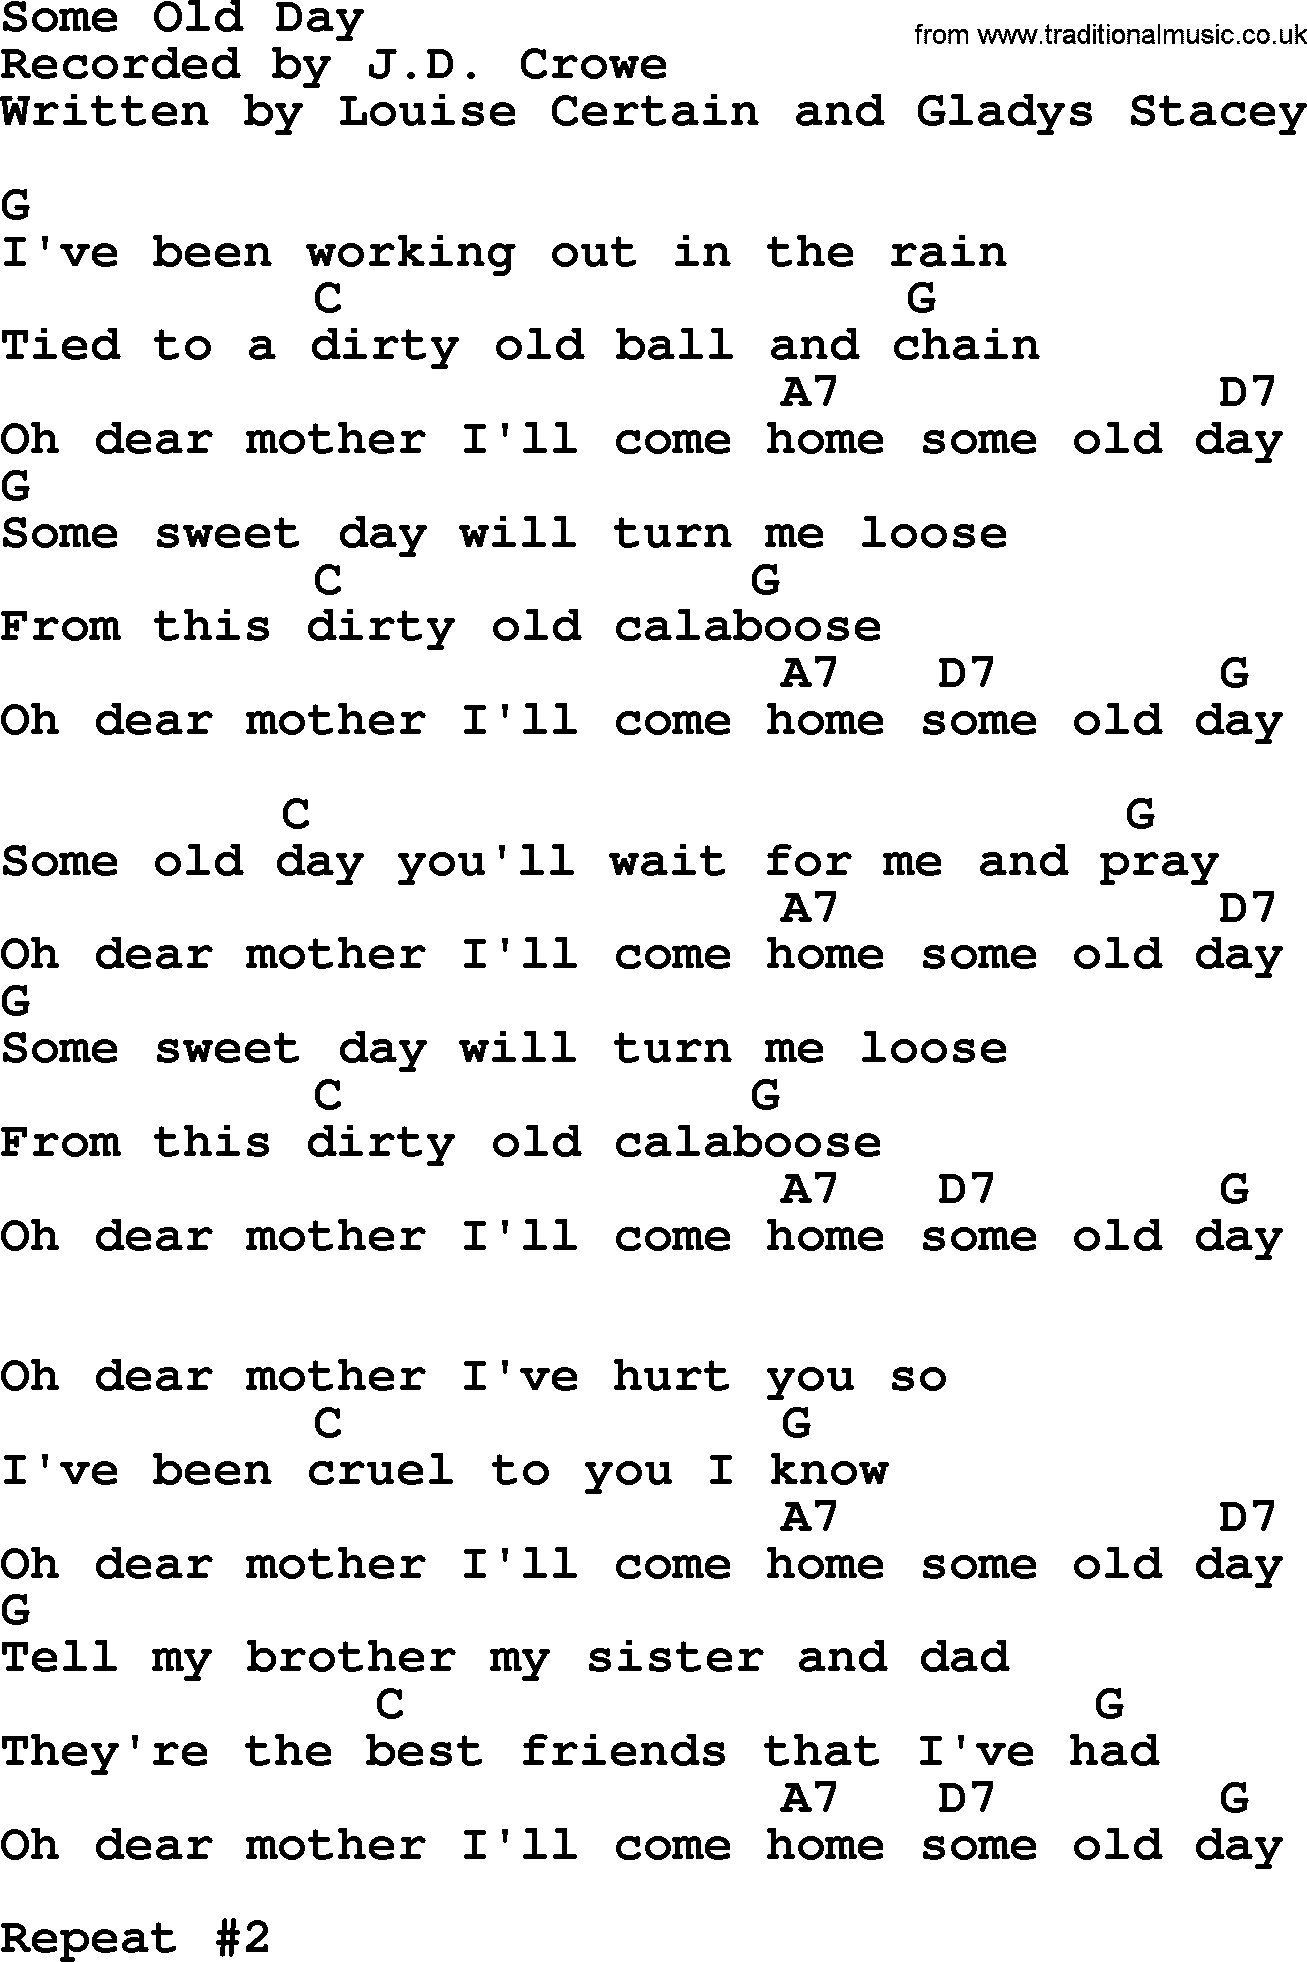 Bluegrass song: Some Old Day, lyrics and chords